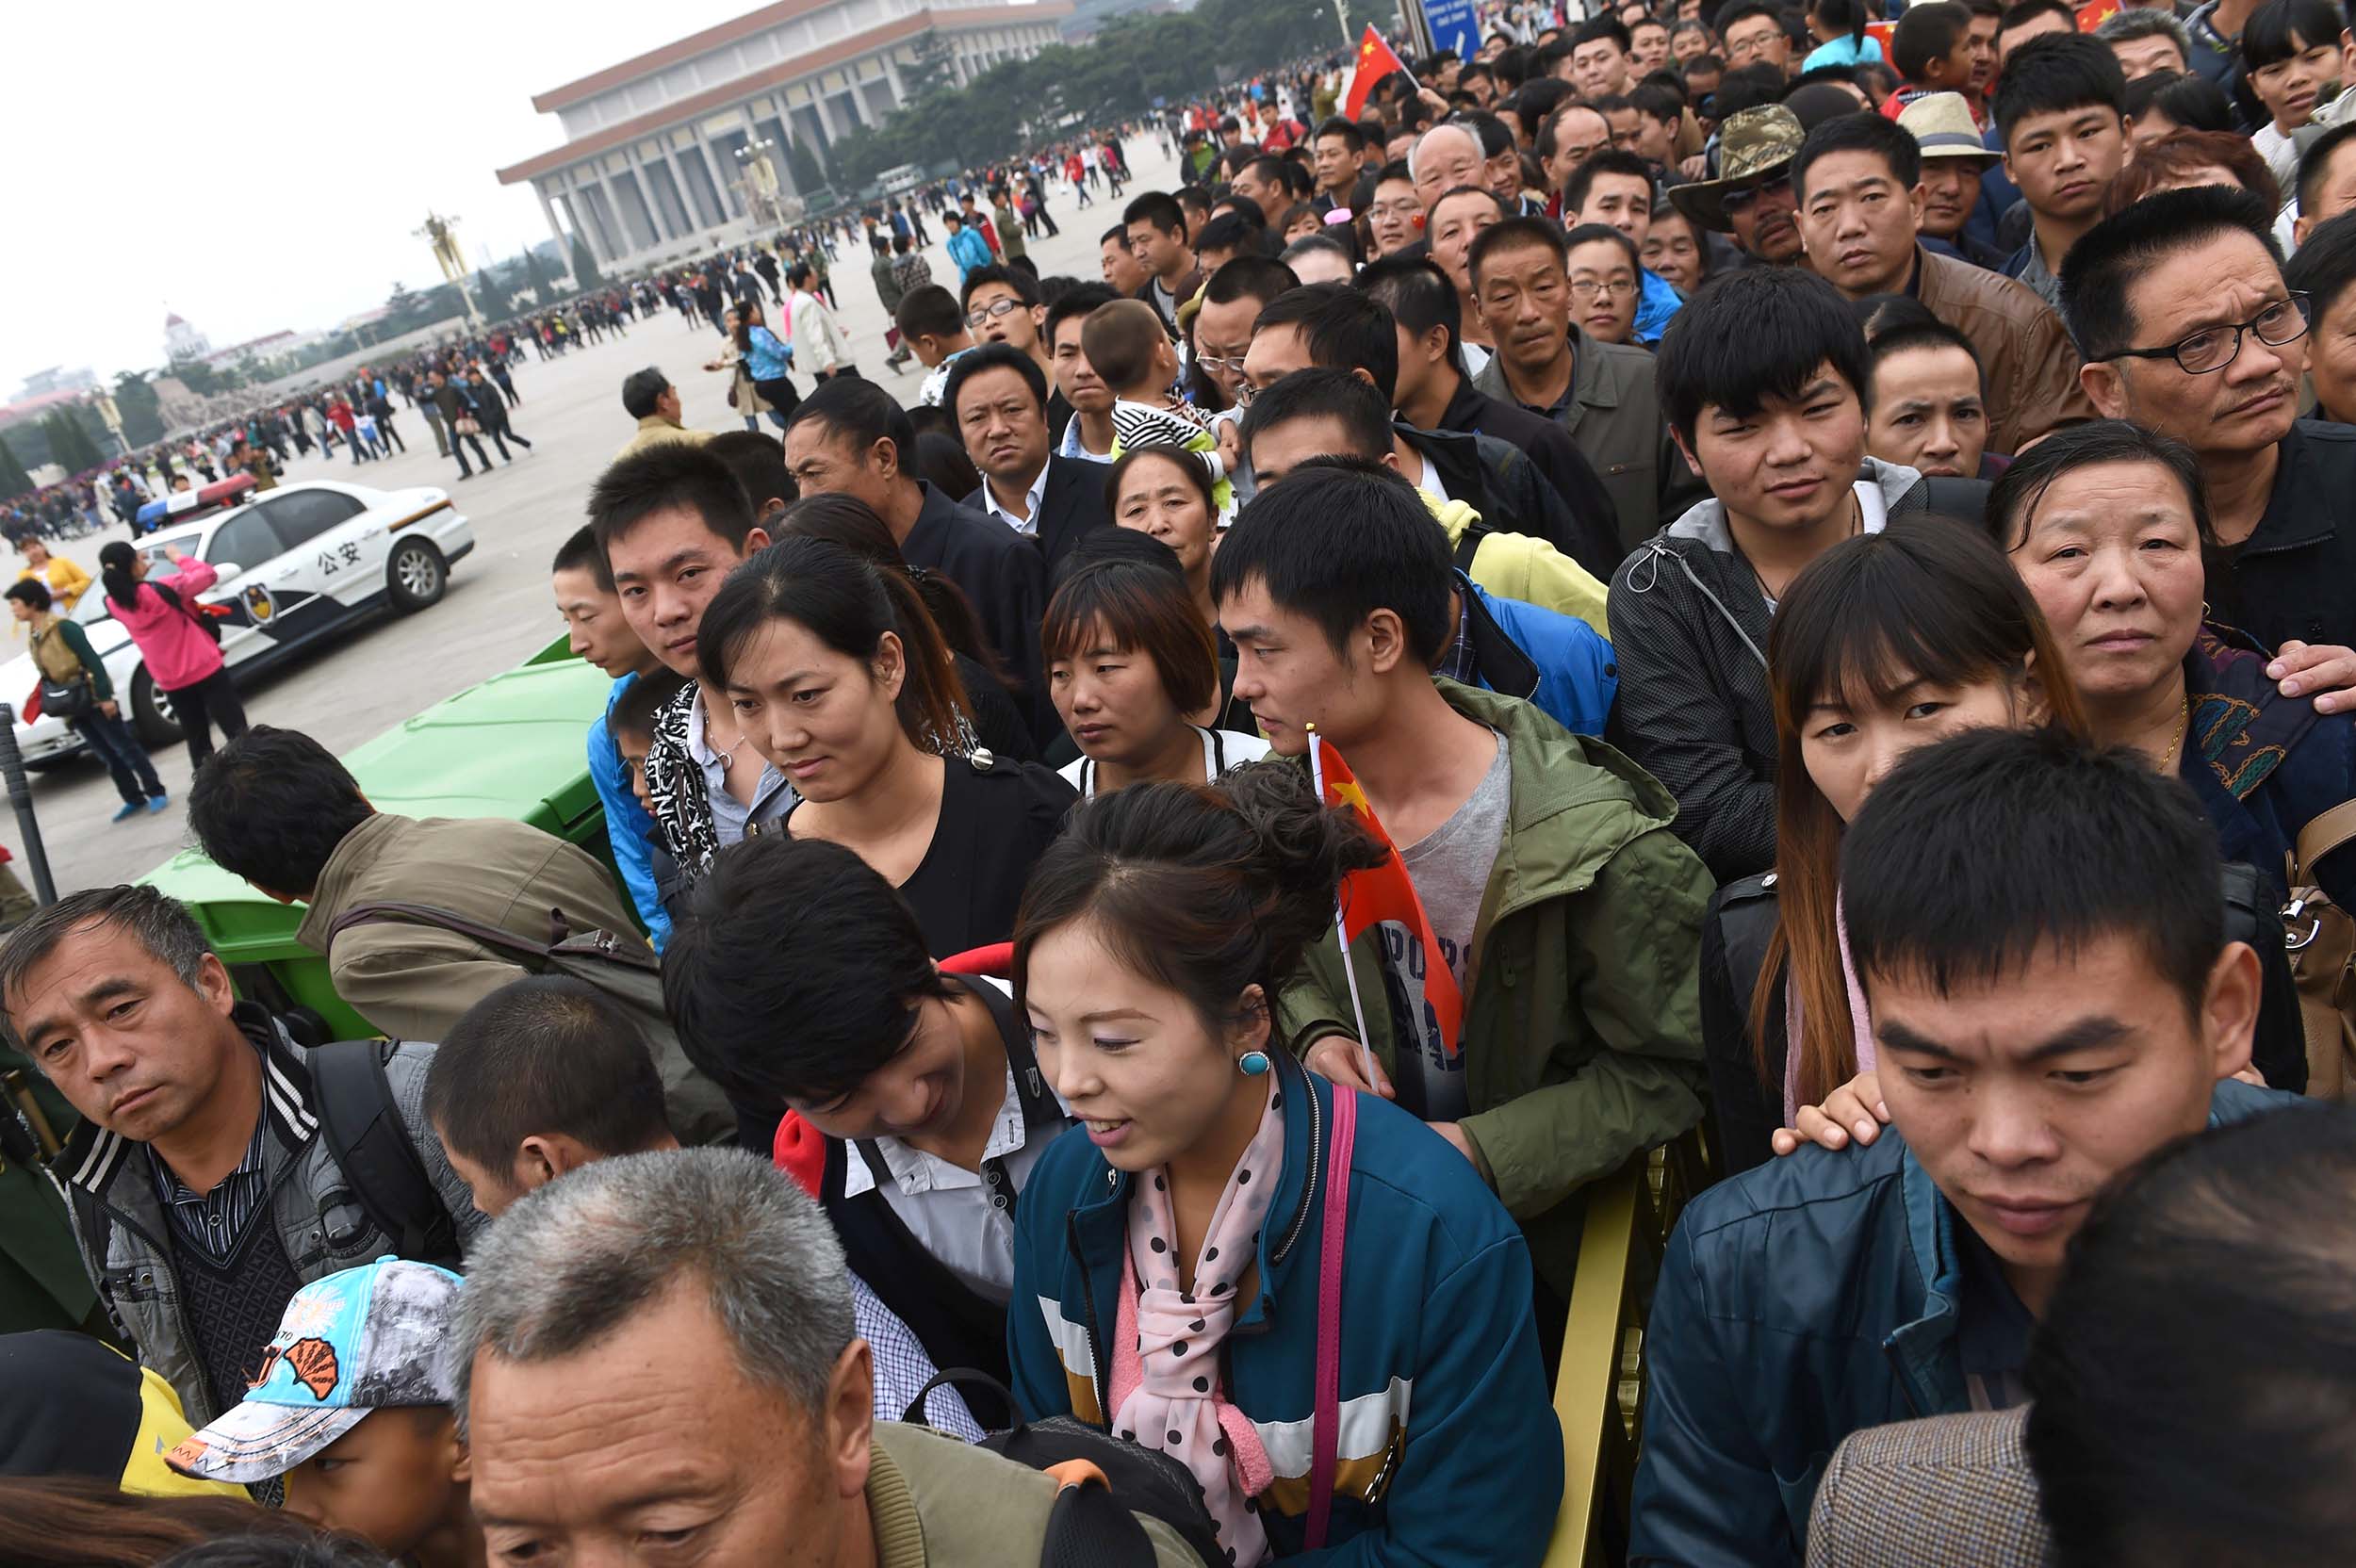 People wait to go through a security check at an entrance to Tiananmen Square, near the mausoleum of late communist leader Mao Zedong (top left) in Beijing on China's National Day.
